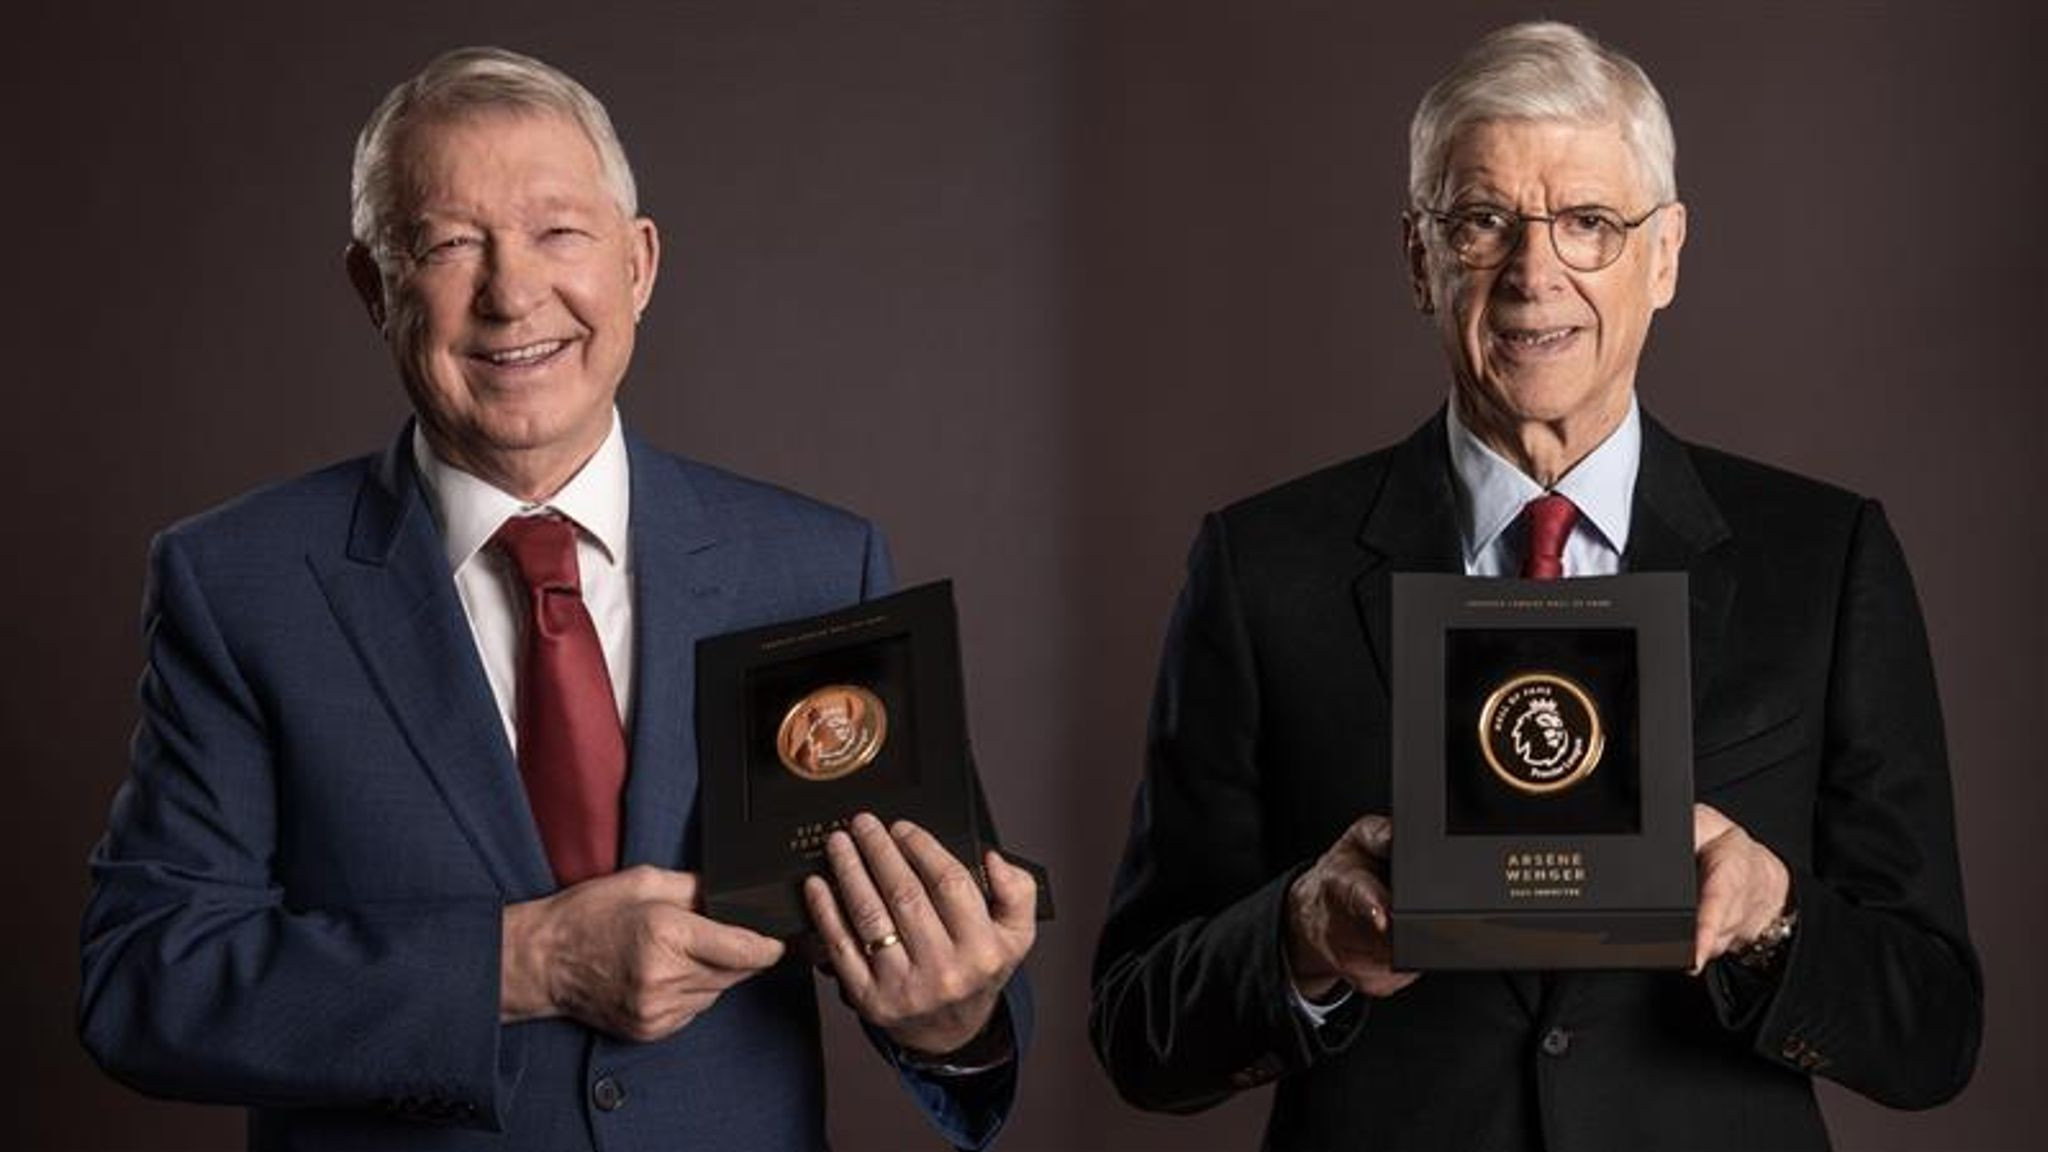 Ferguson, Wenger inducted into Hall of Fame